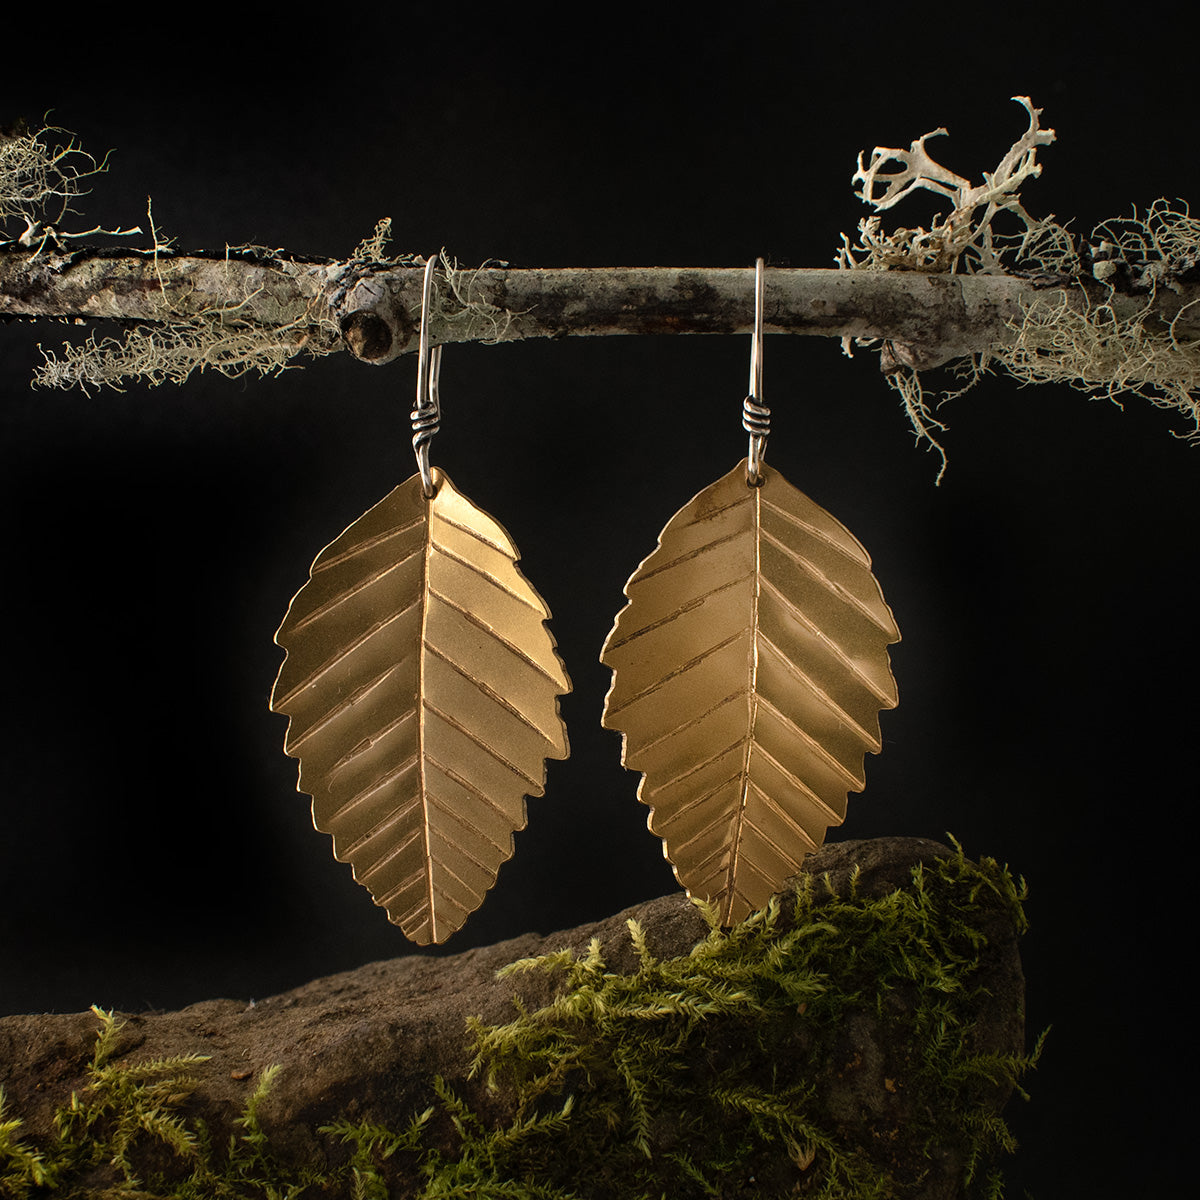 A pair of handmade shiny brass earrings, each textured like an alder leaf, and dangling by its sterling silver ear wire.